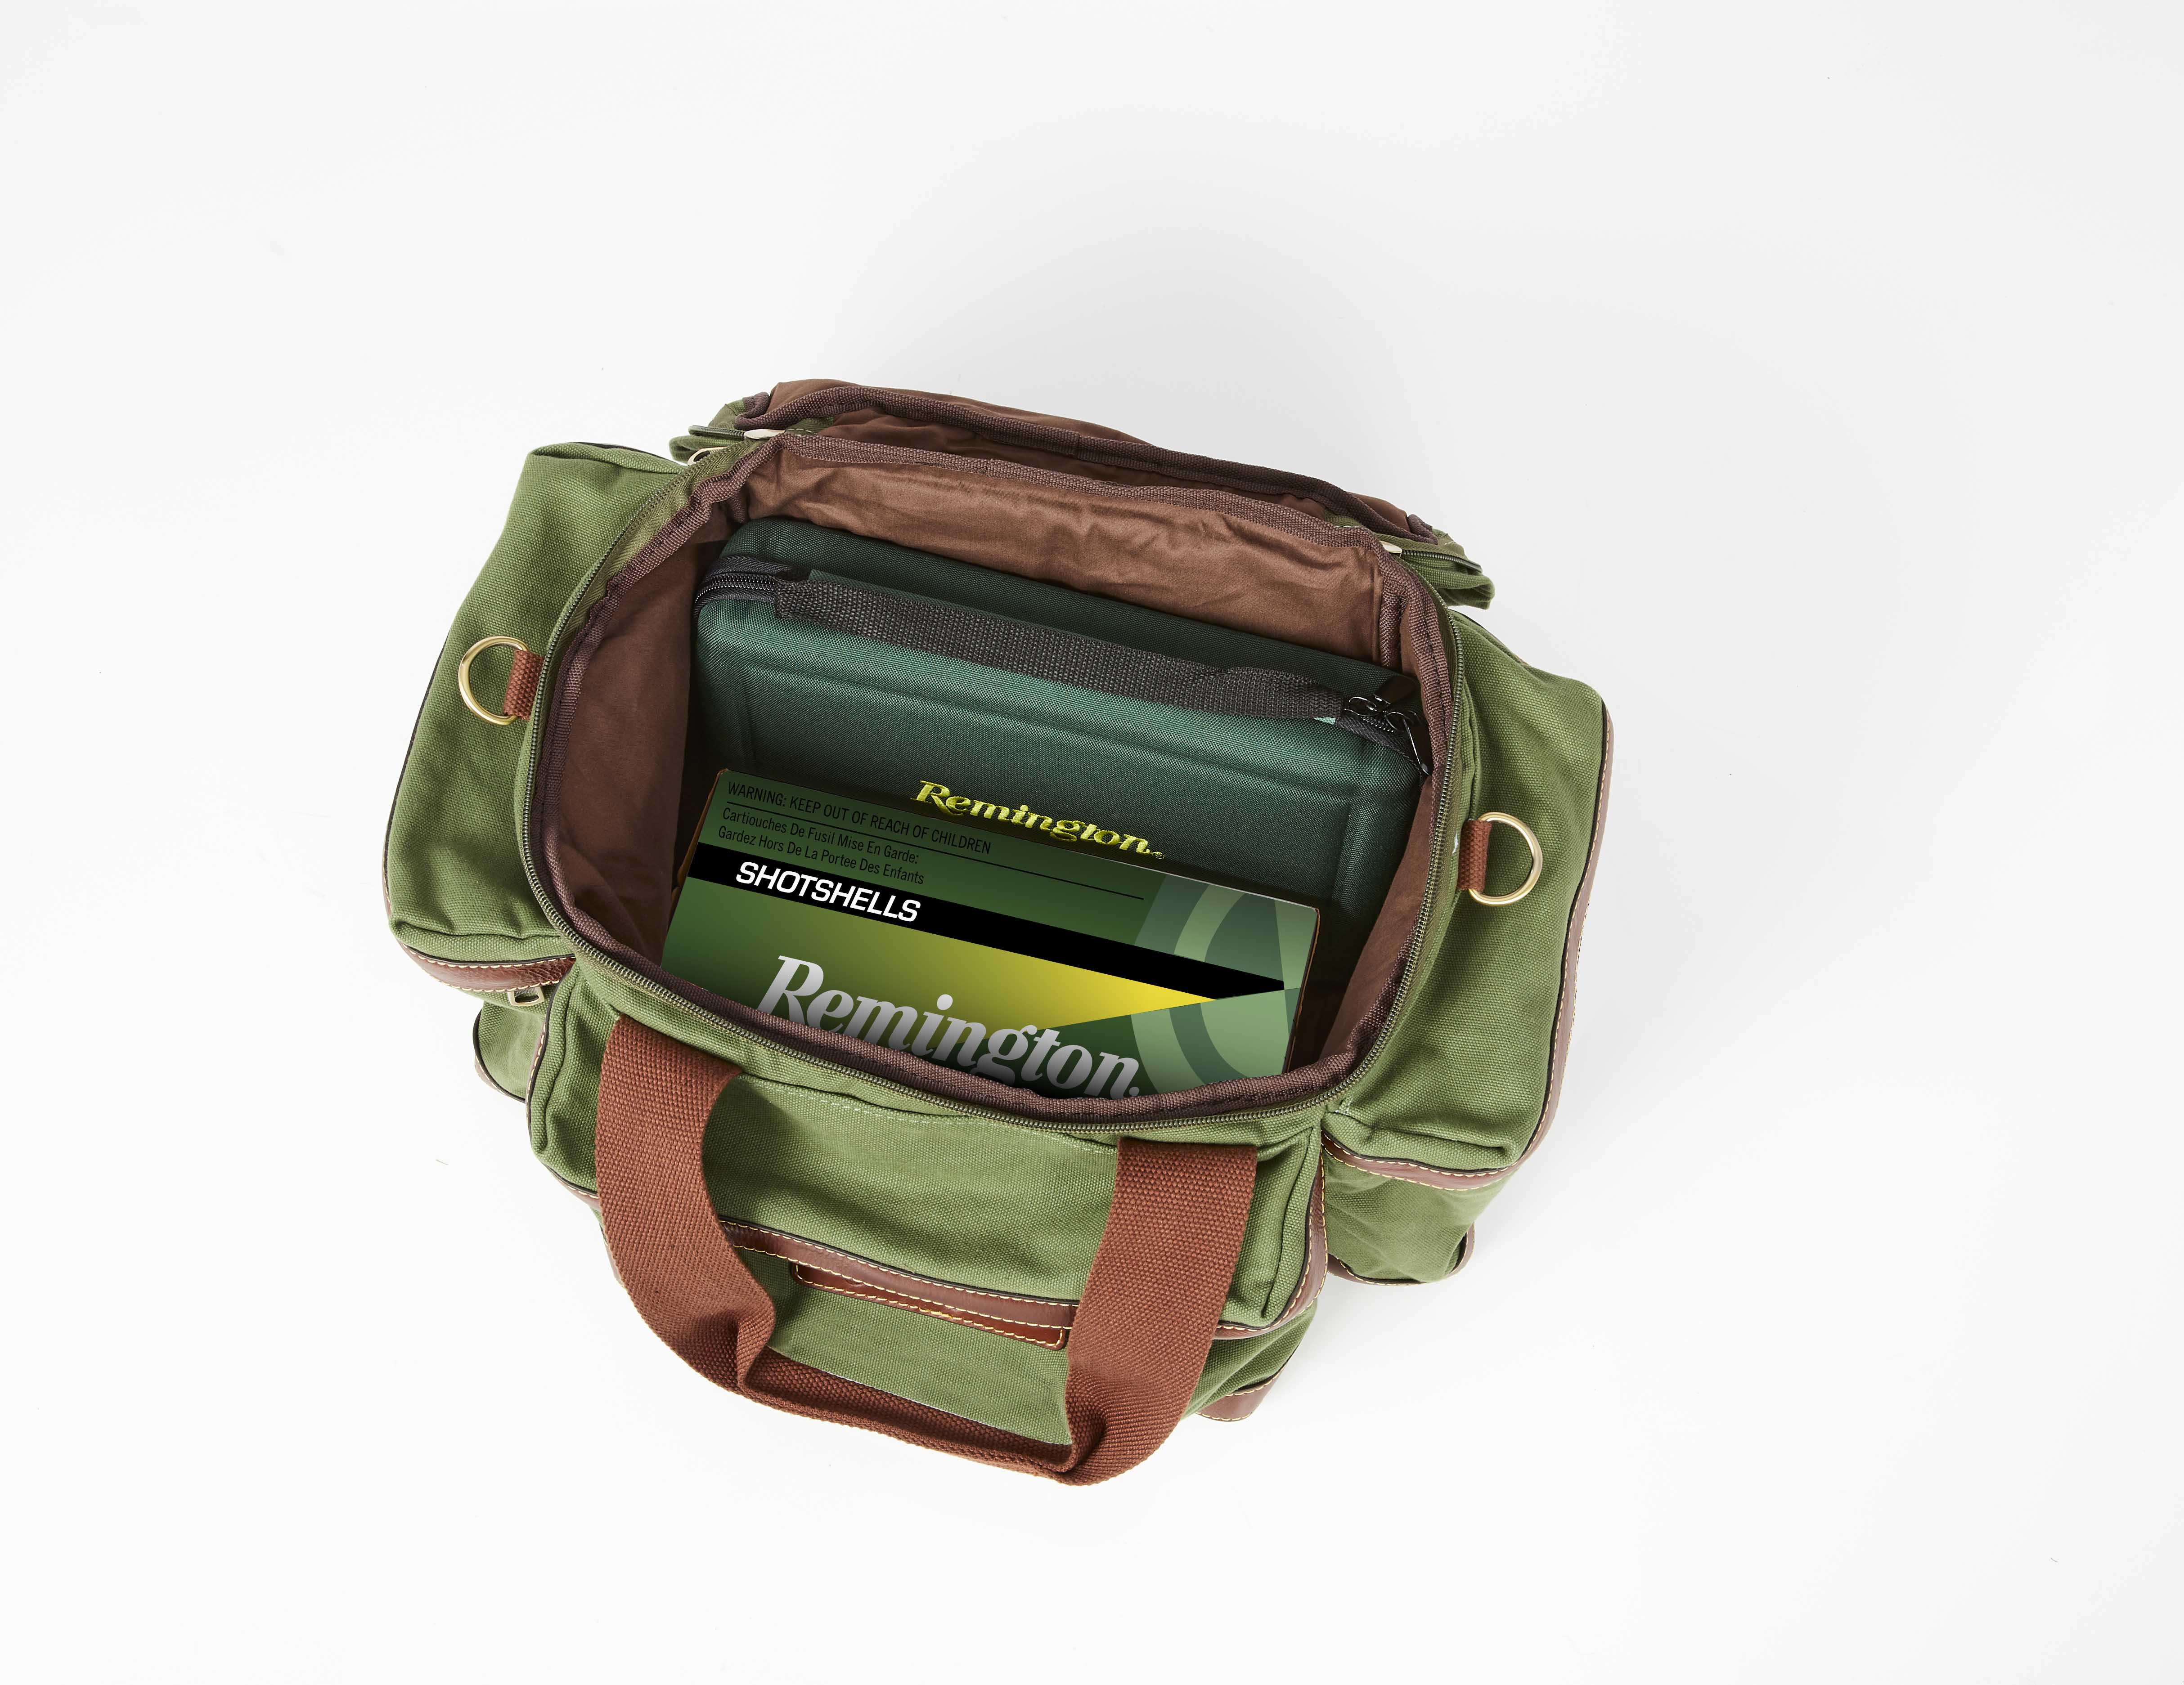 Remington Shooting Bag in Green Waxed Canvas - RMG-SB1-GRNWC - Levy's  Outdoor